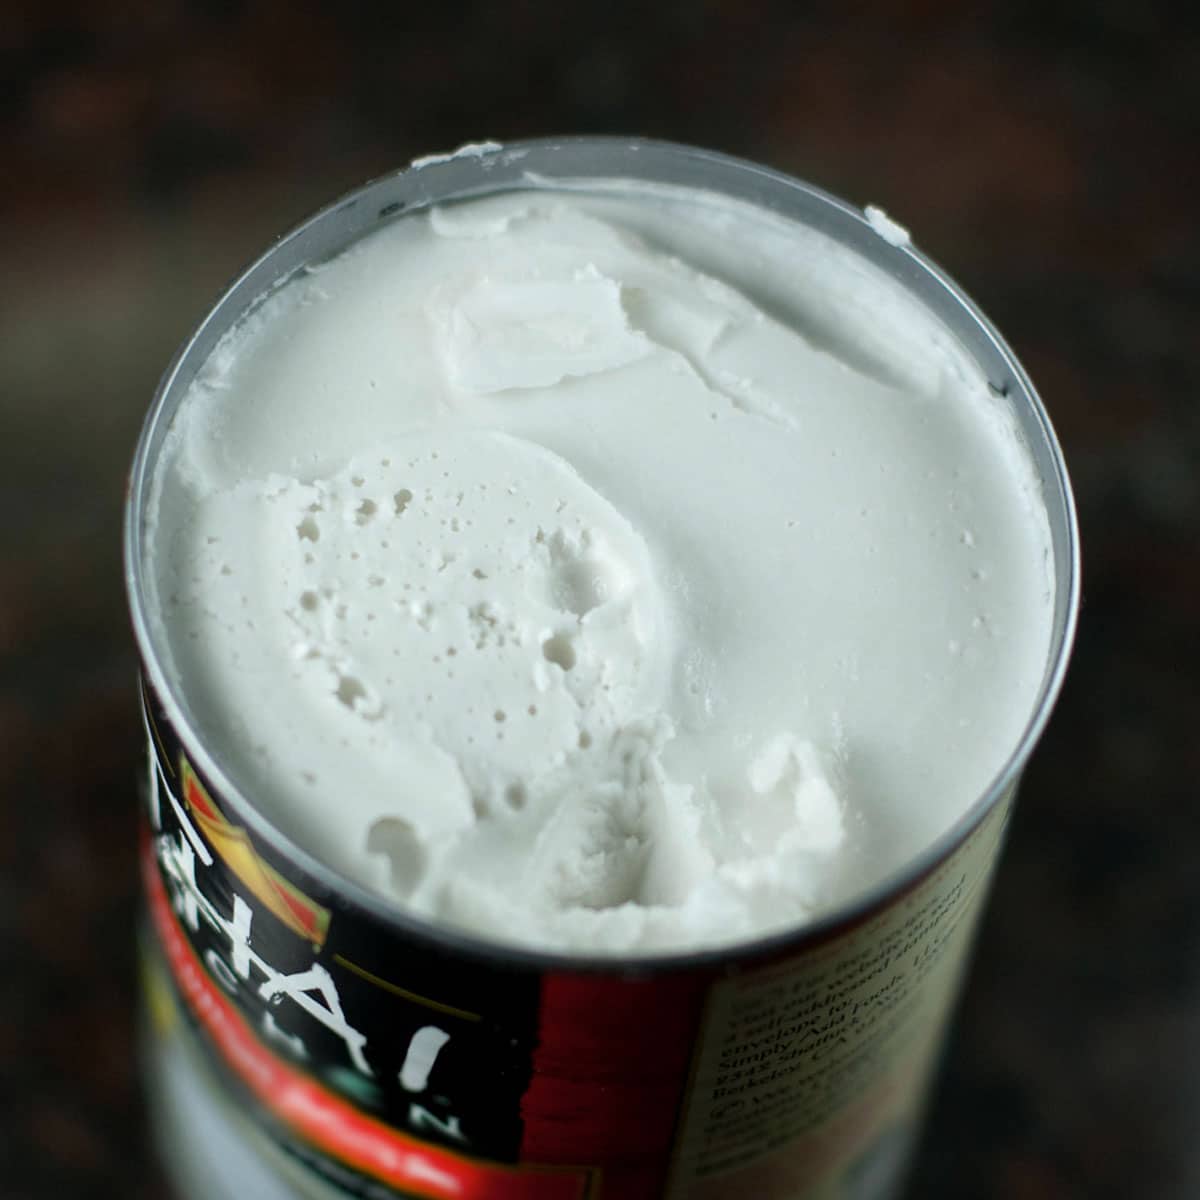 If you do it correctly, your frozen coconut cream will still be good to use after several months. You need to be aware that freezing it is likely to change its consistency, flavor, and texture.